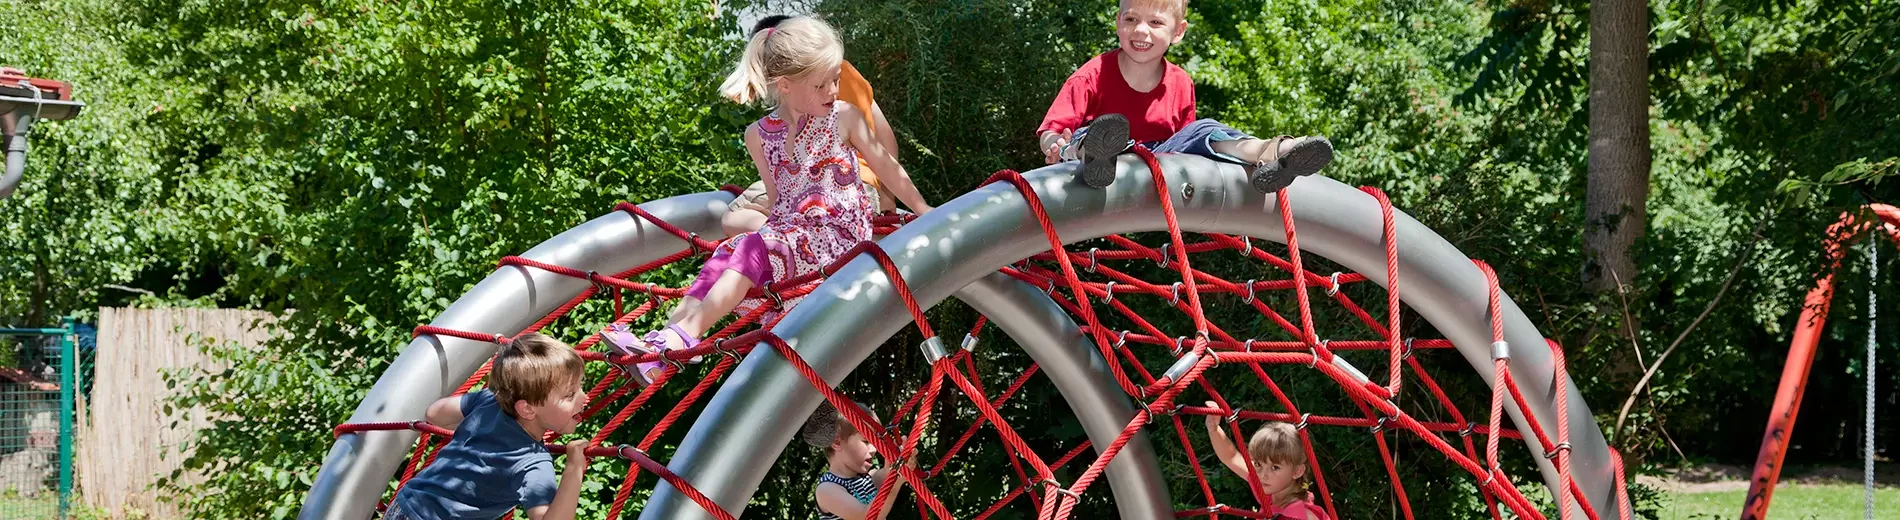 small young children climbing on a rope playground for toddlers hero image